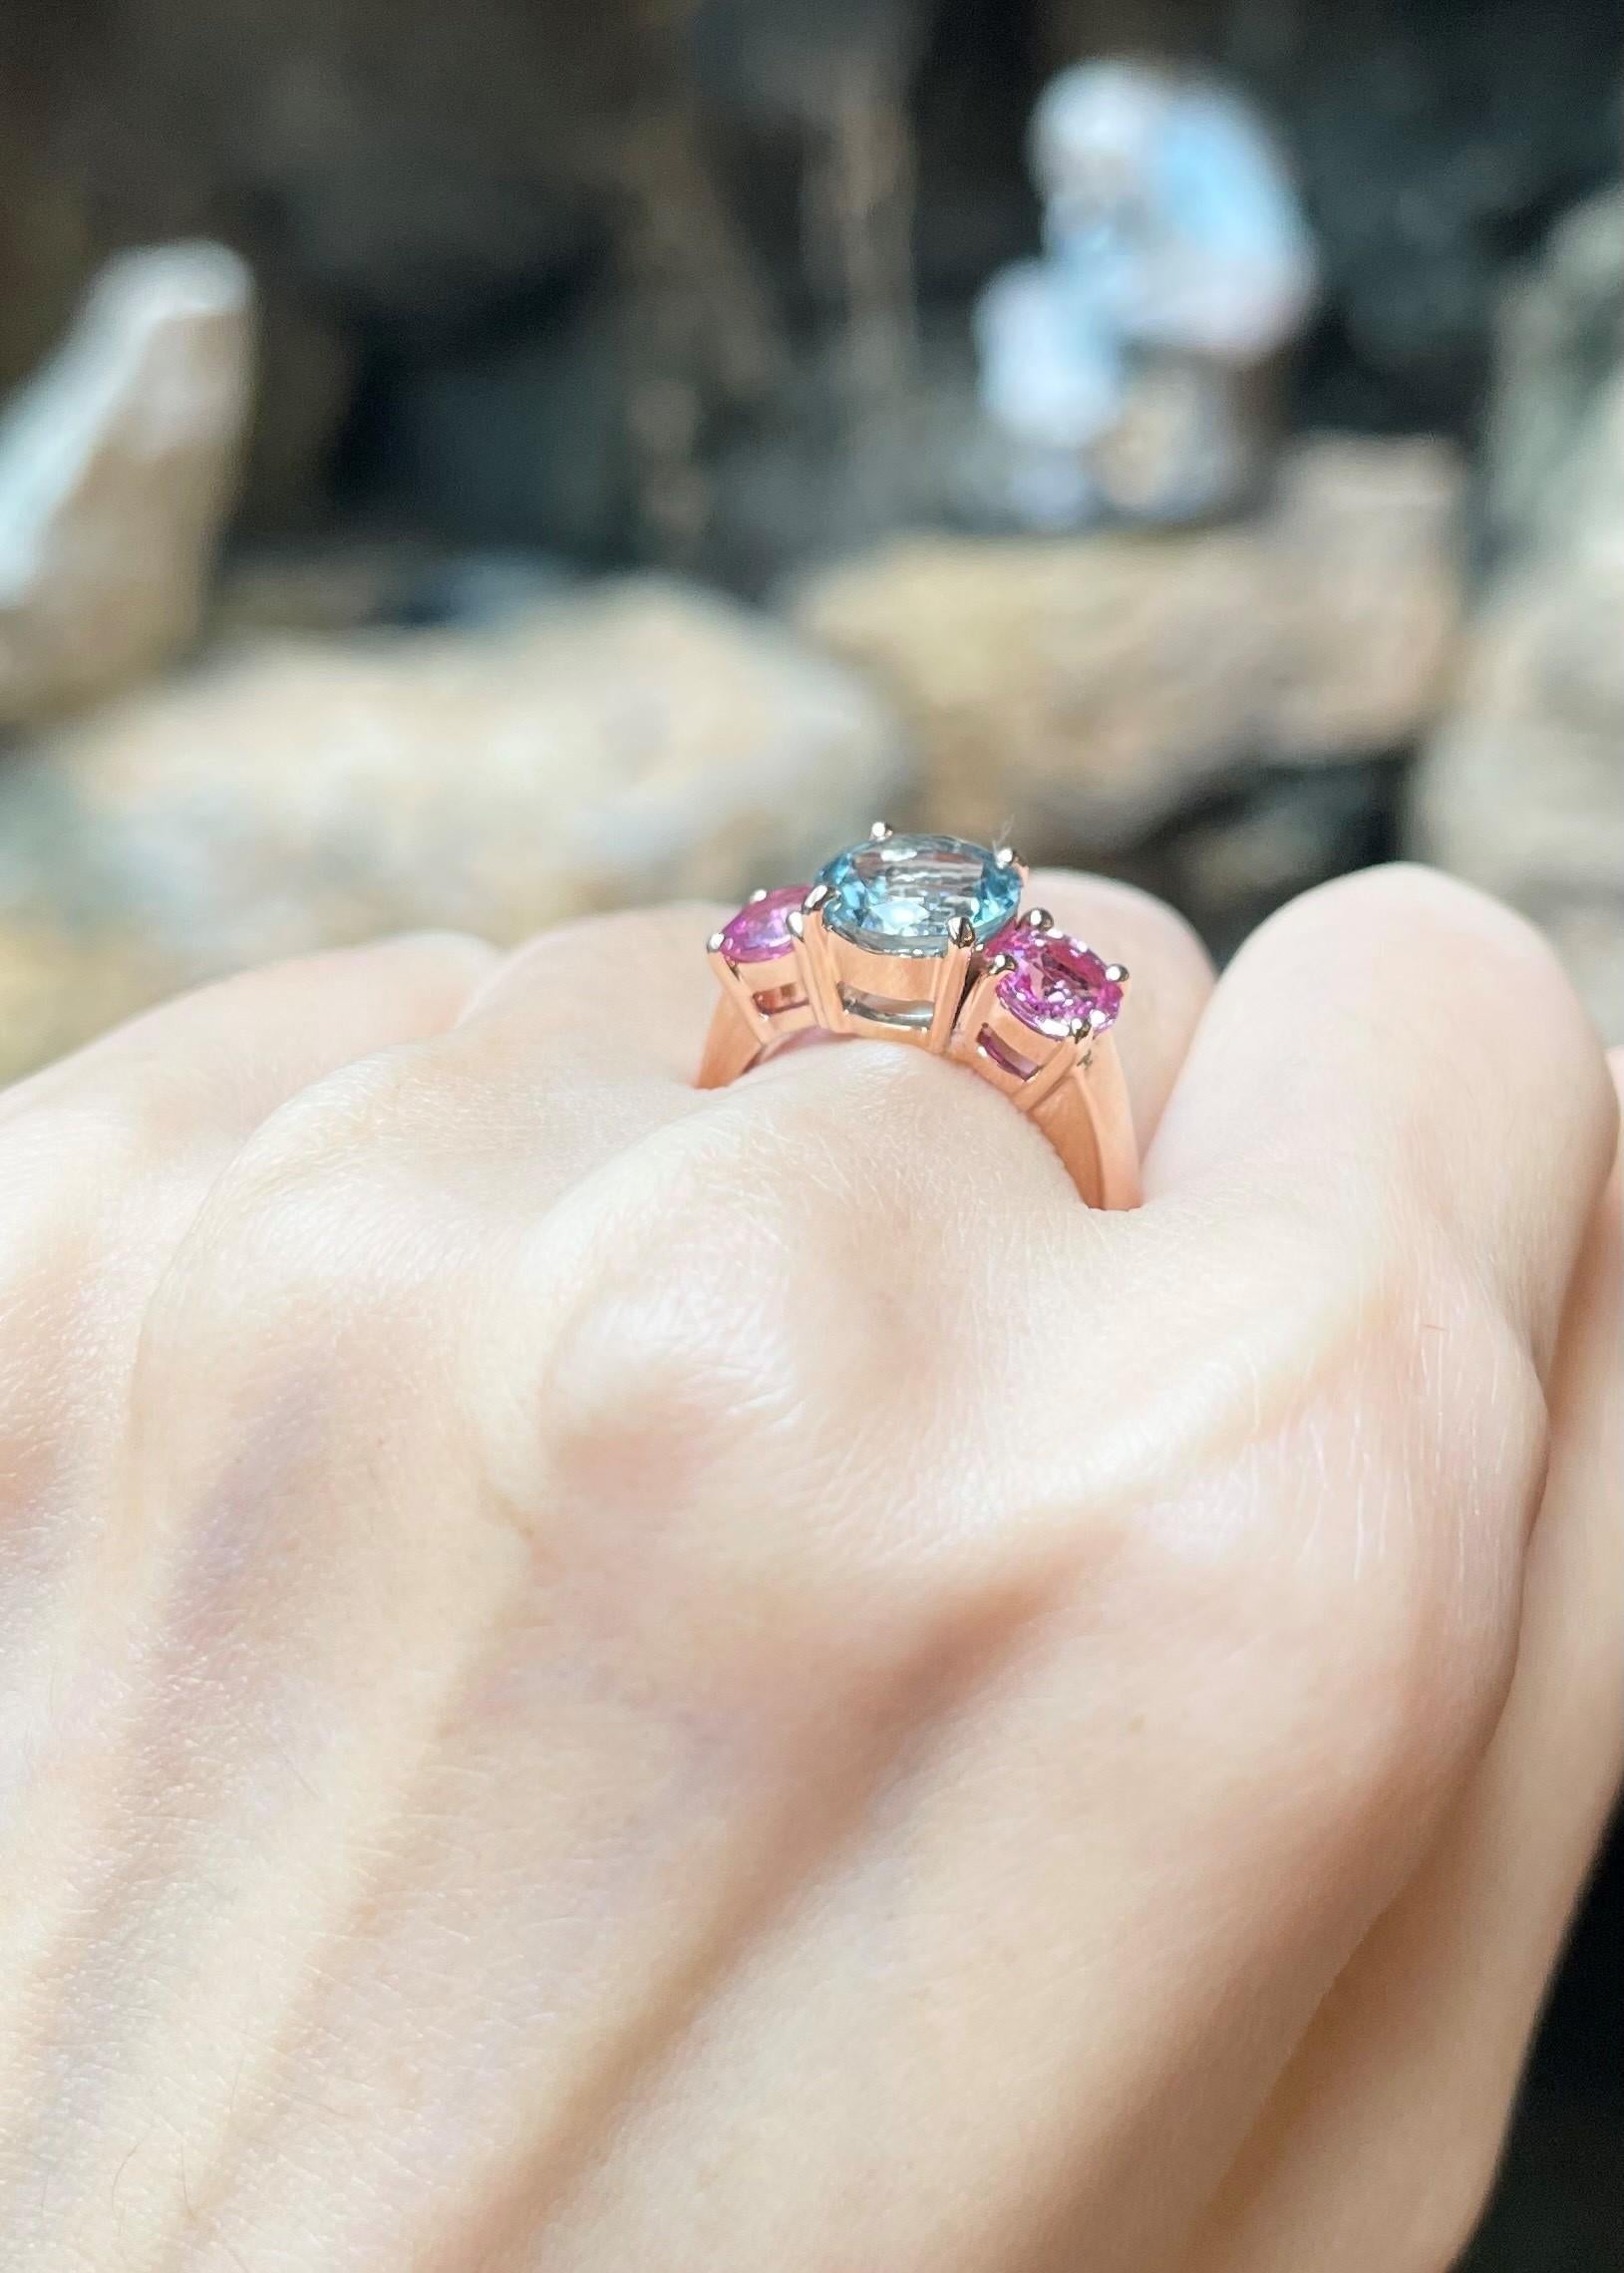 Aquamarine 2.35 carats with Pink Sapphire 1.82 carats Ring set in 18K Rose Gold Settings

Width:  1.8 cm 
Length: 0.8 cm
Ring Size: 54
Total Weight: 6.29 grams

